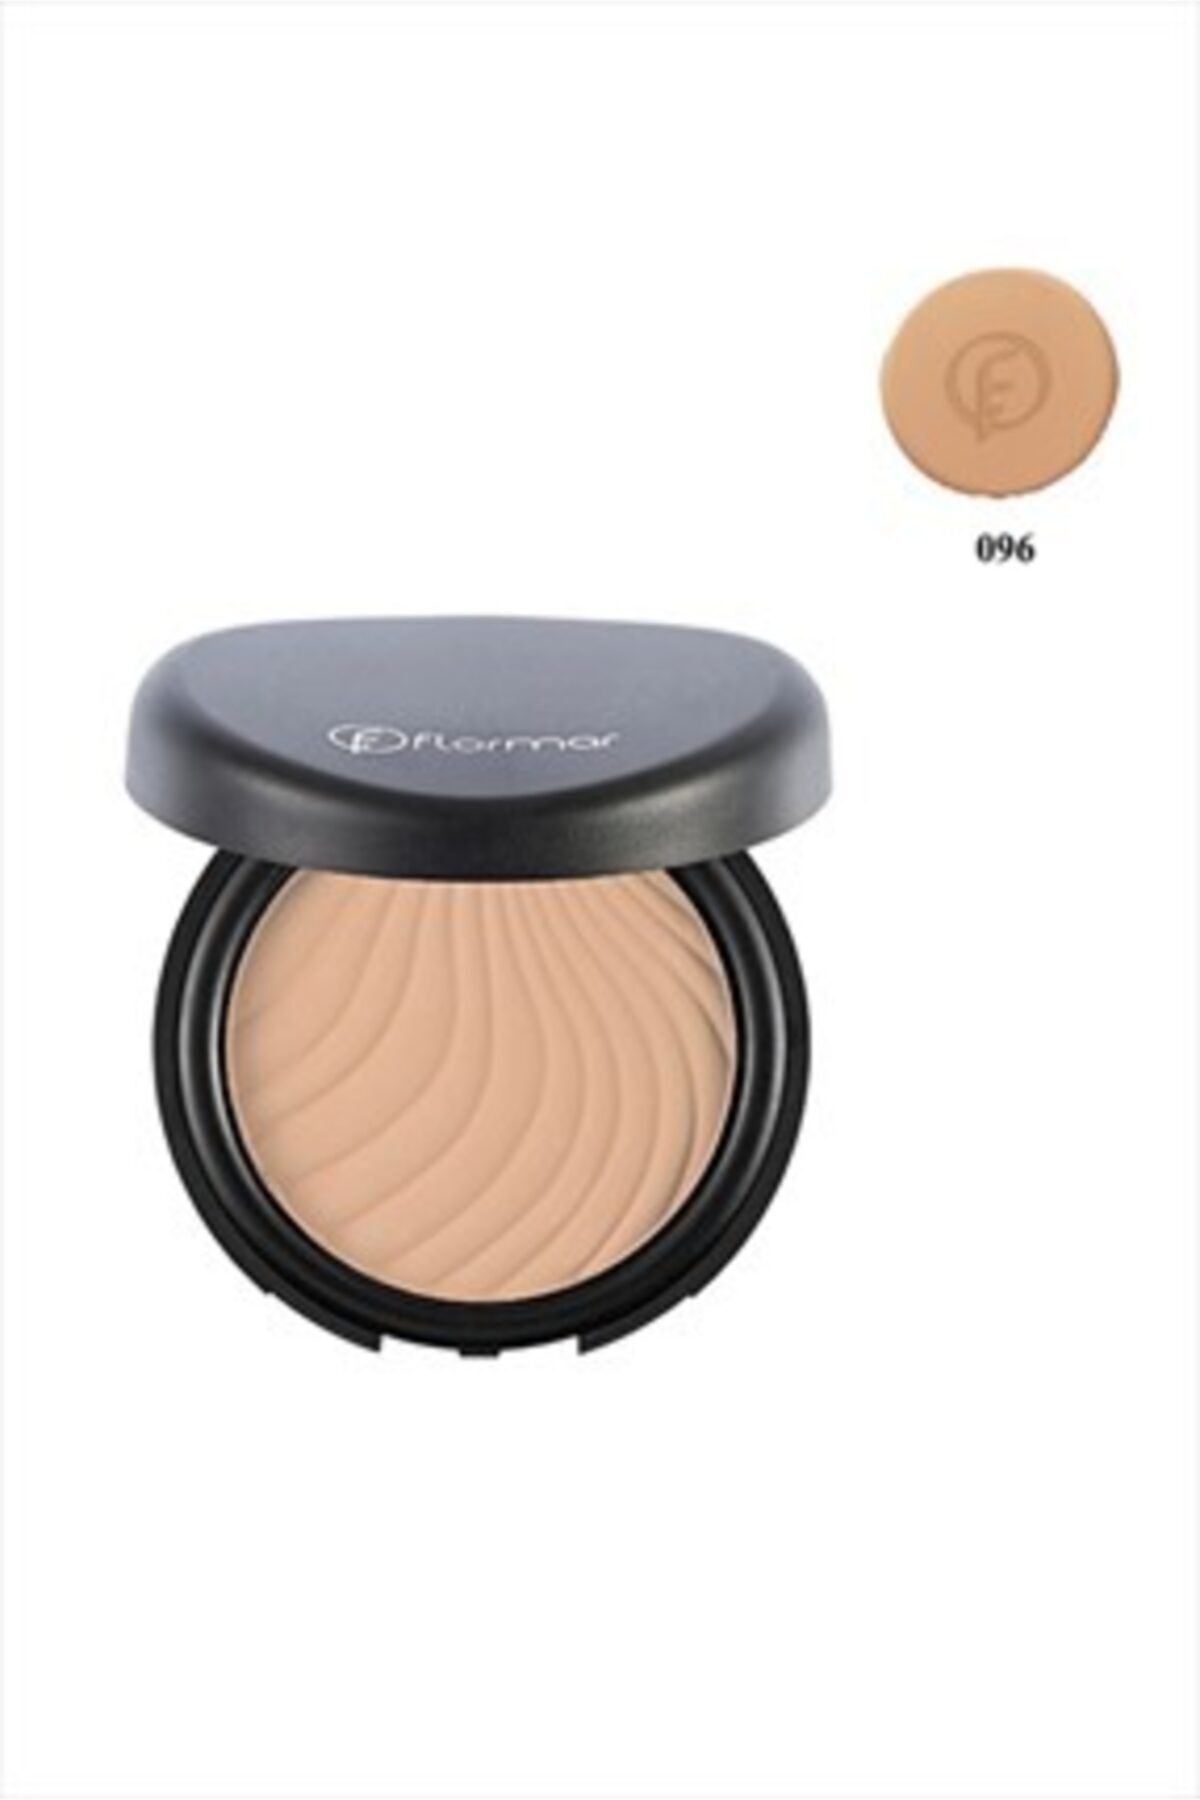 Flormar Pudra - Wet & Dry Compact Powder W03 8690604134205